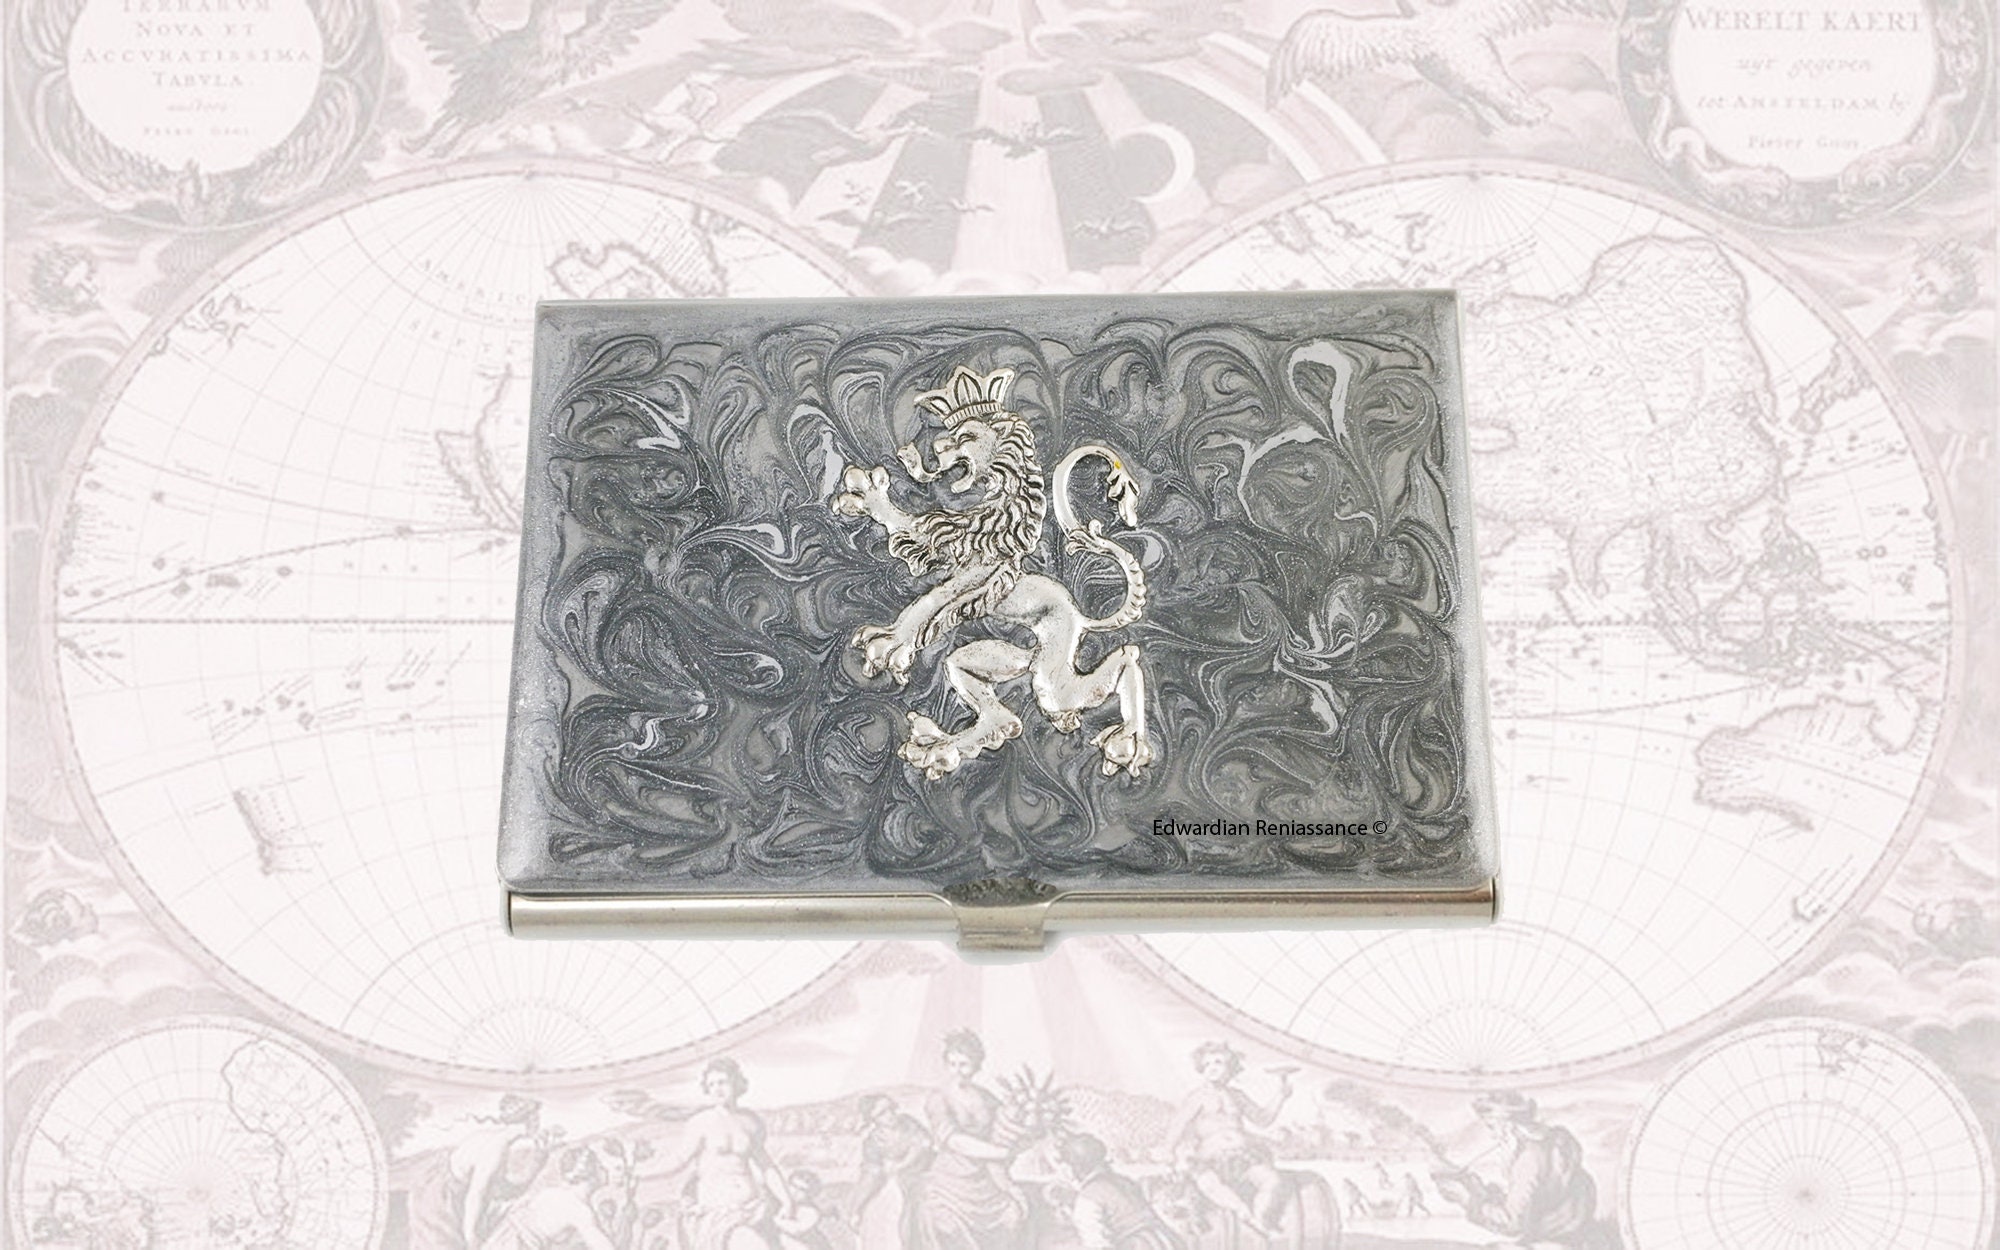 Rampant Lion Business Card Case Inlaid in Hand Painted Silver Swirl Design Medieval Lannister Inspired With Personalized & Color Options